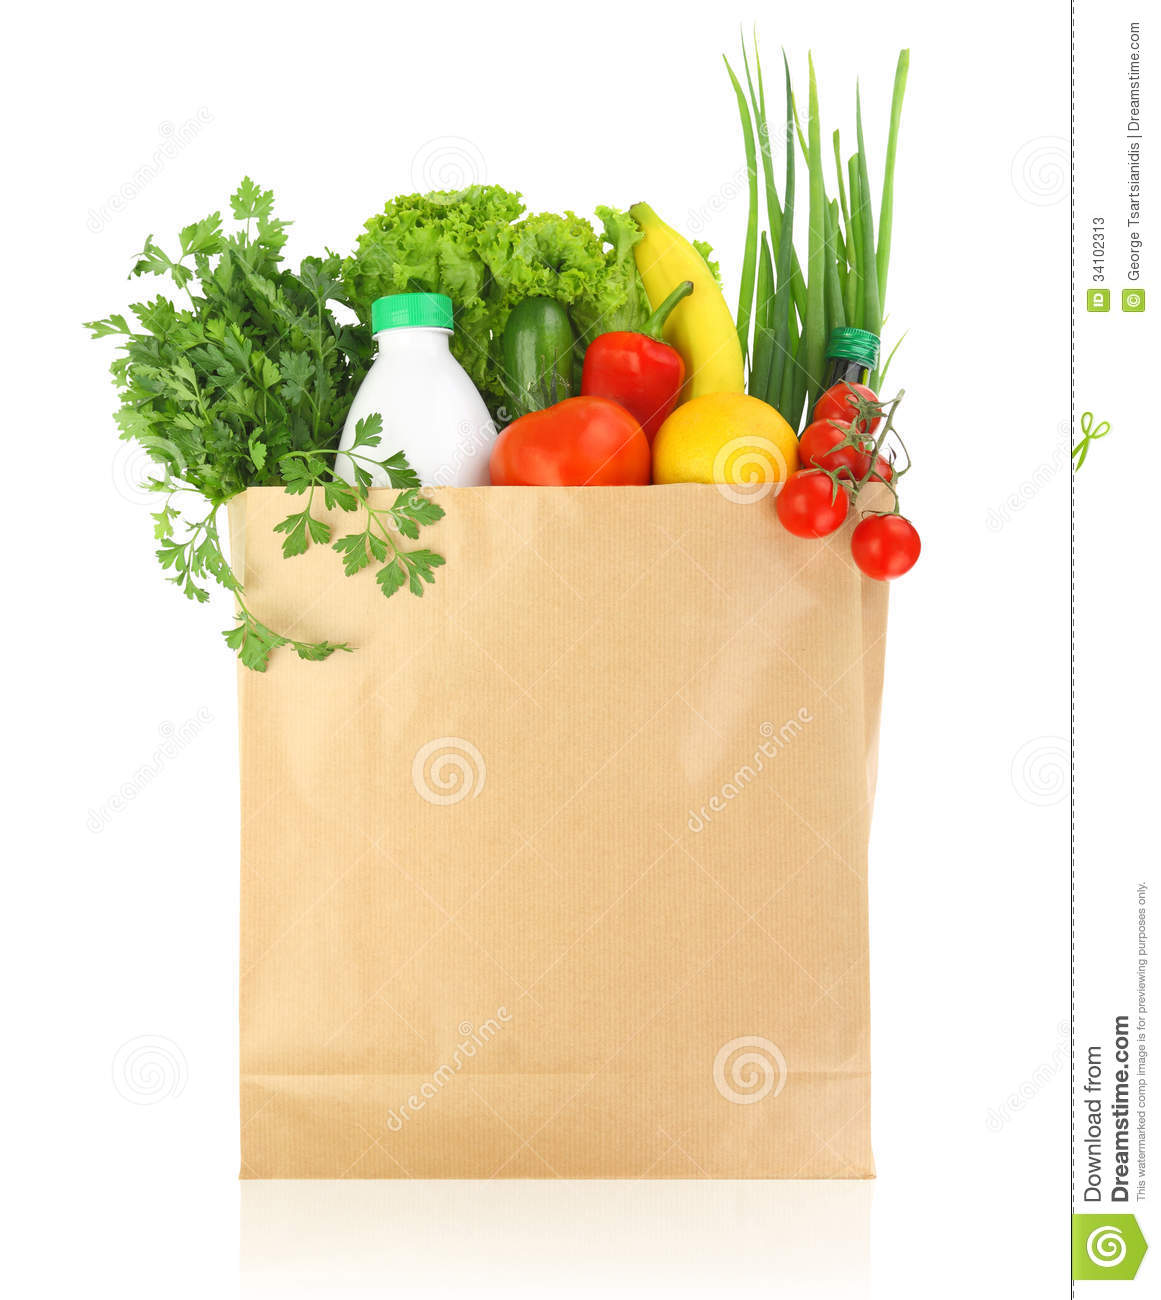 Fresh Healthy Groceries In A Bag Stock Photos   Image  34102313